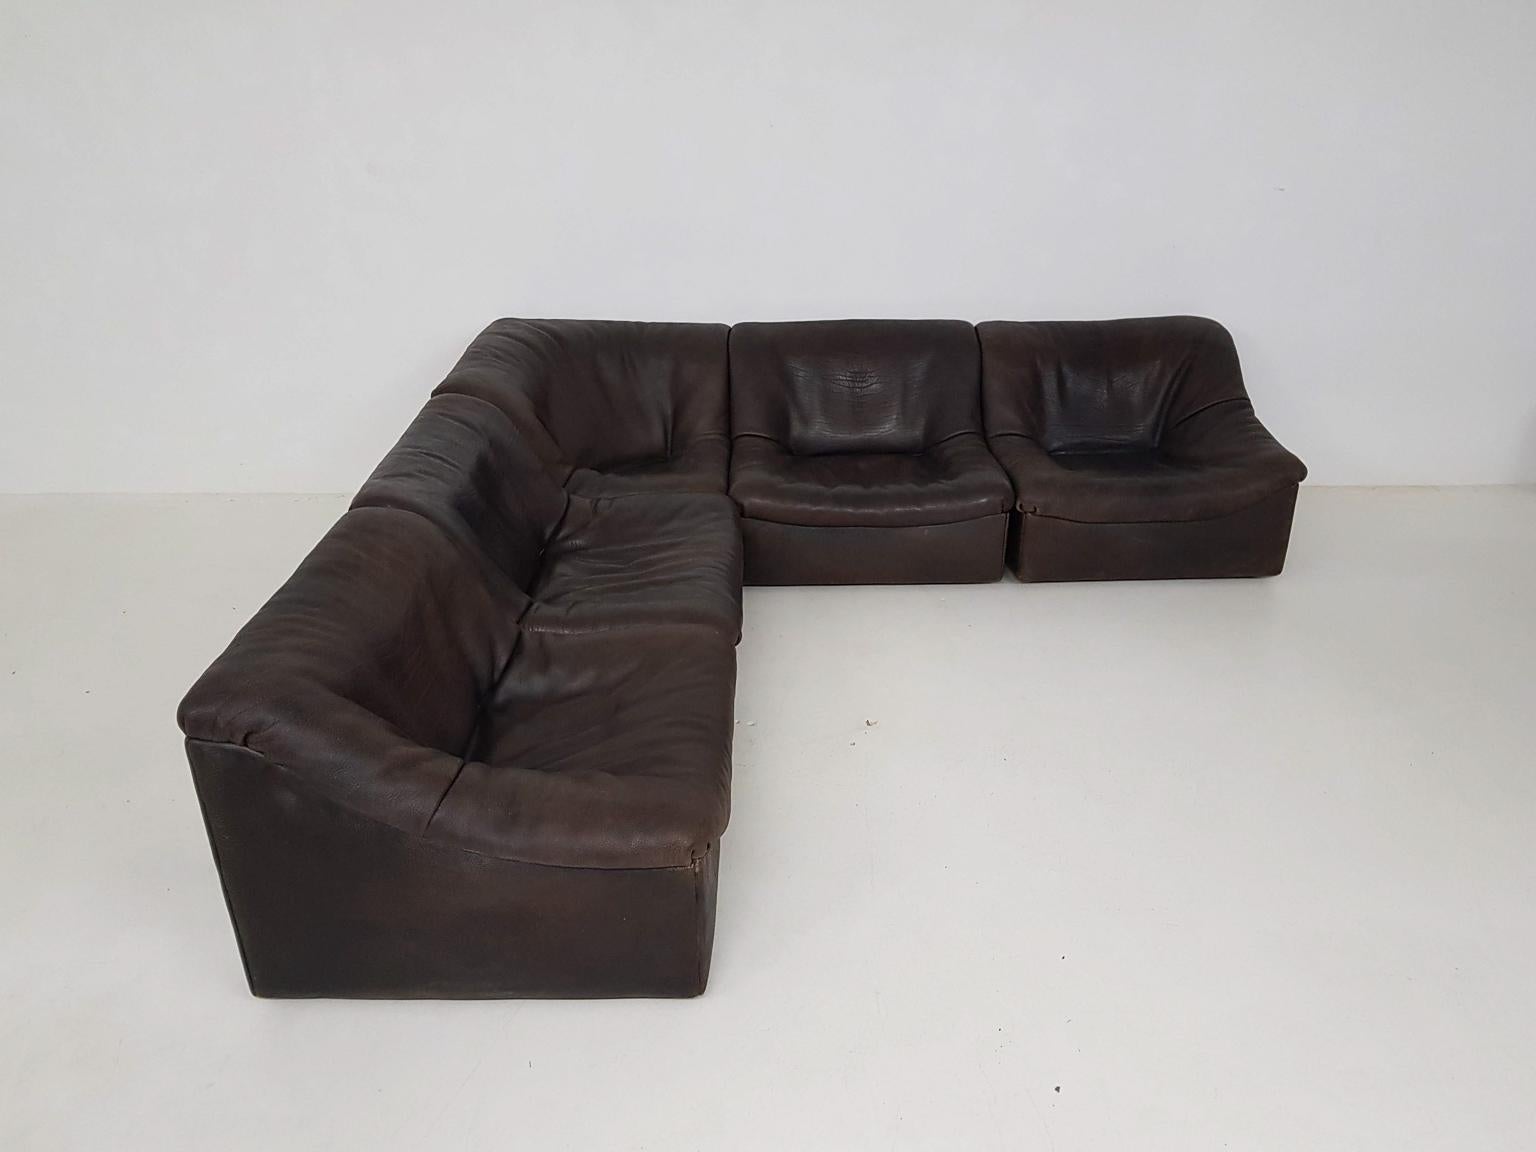 Beautiful sectional model DS 46 sofa of the highest quality by De Sede. This sofa, consisting of 5 elements, is made of the thickest bull hide leather that you can imagine.

De Sede is a sofa manufacturer from Switzerland known for its high quality